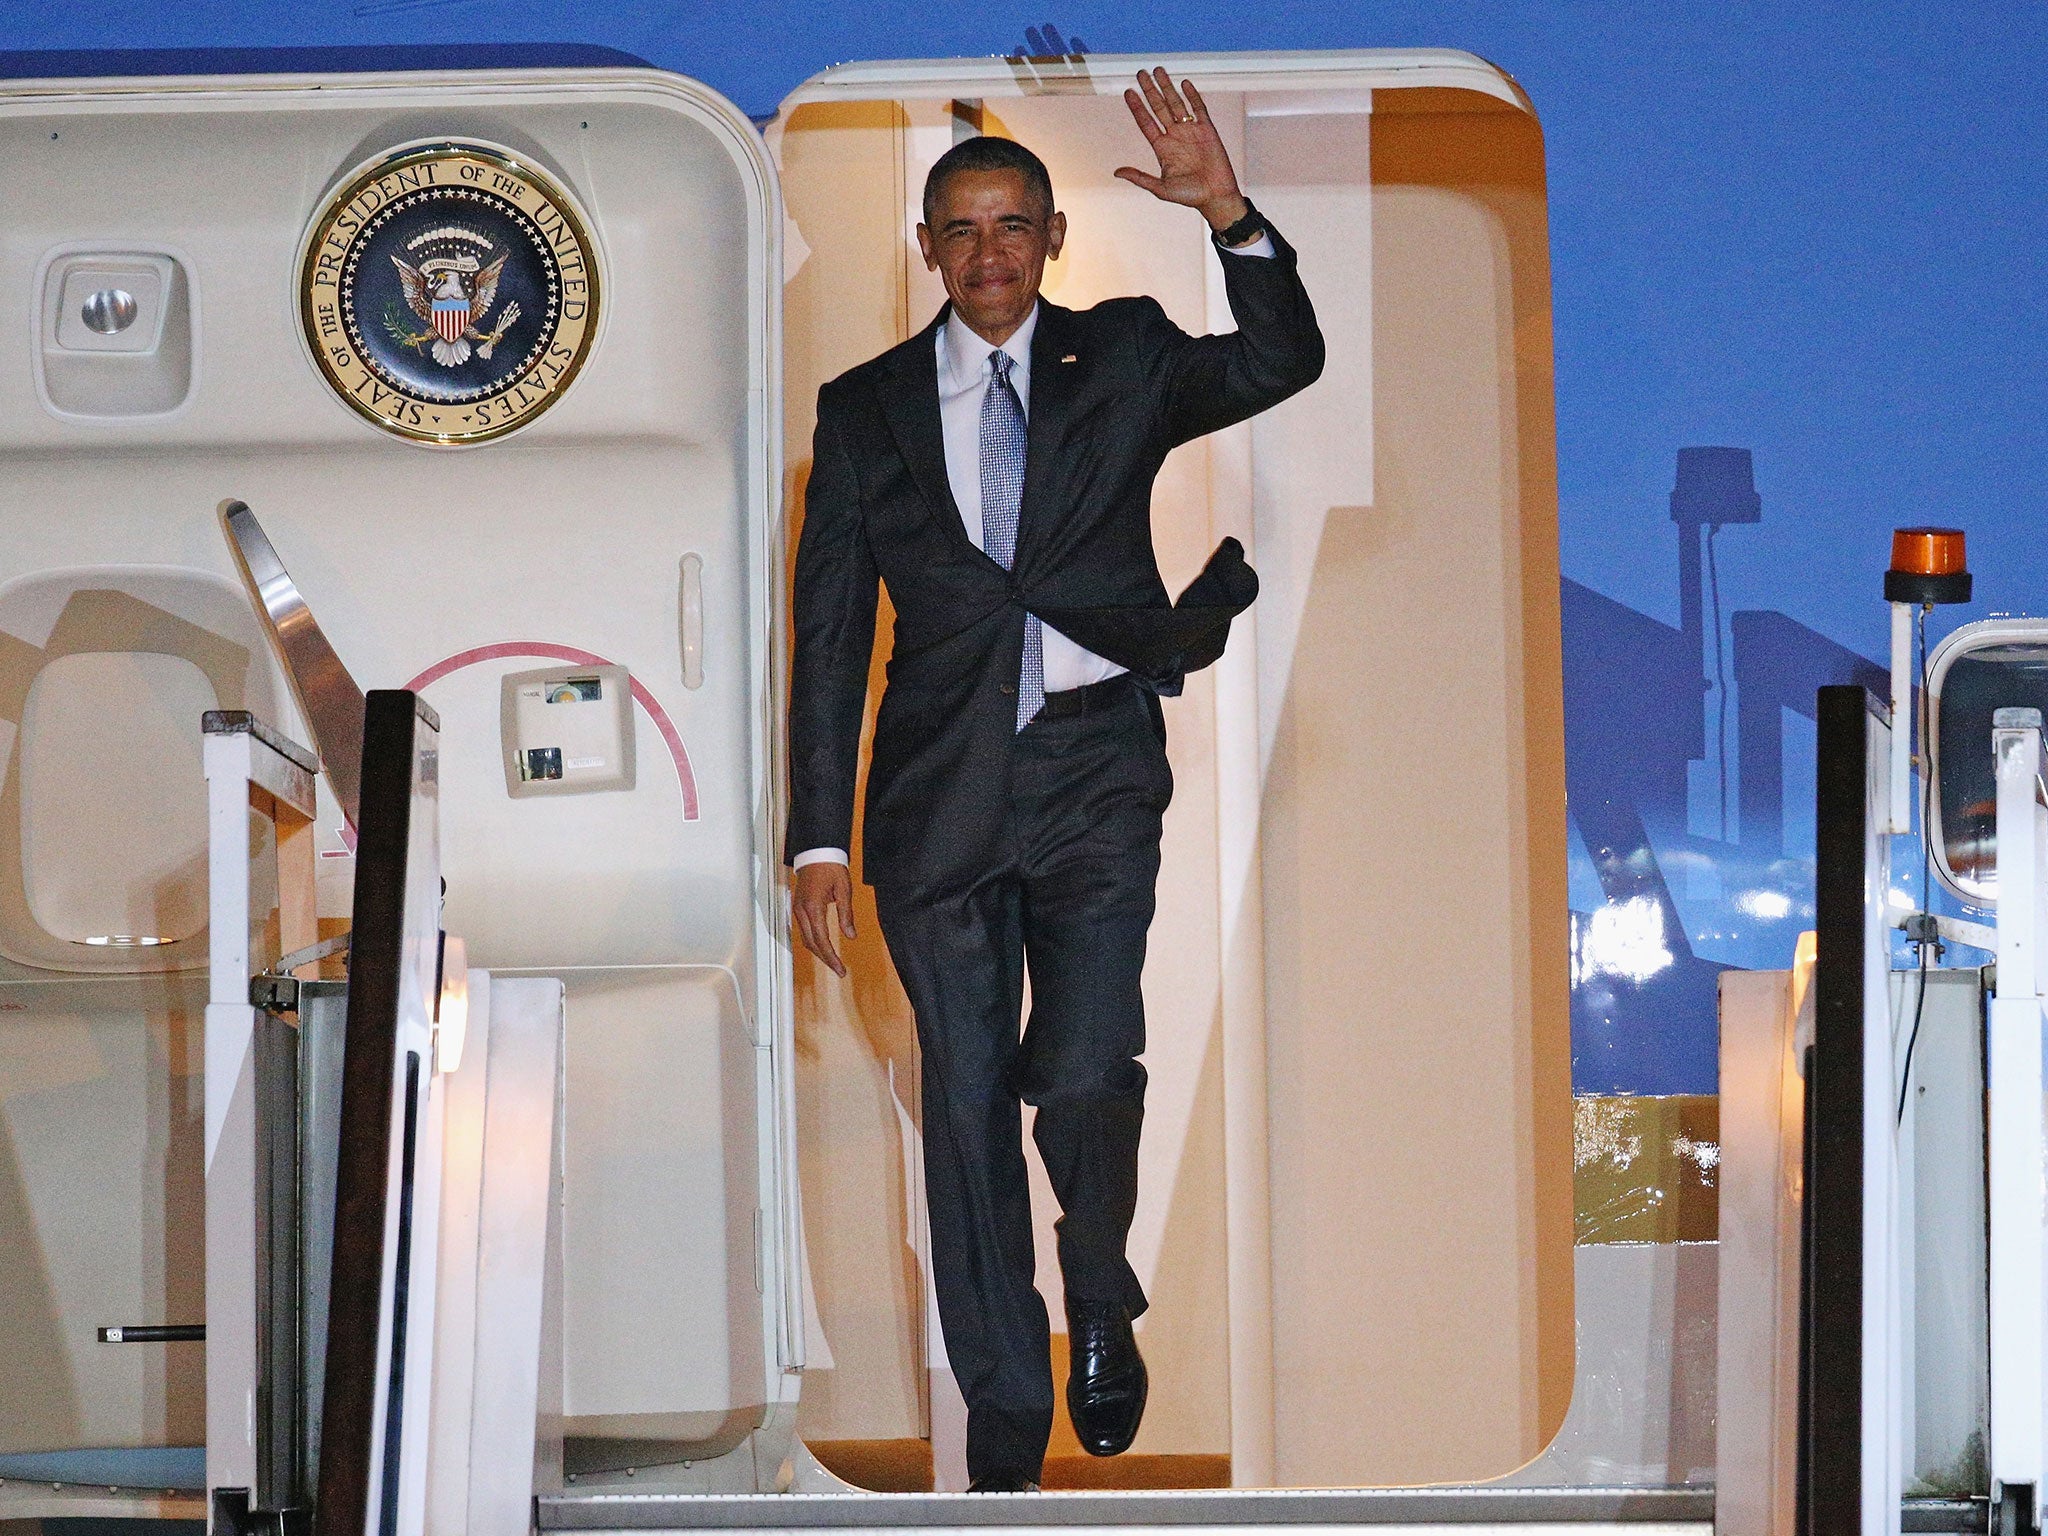 US President Barack Obama steps off Air Force One upon arrival at Stansted Airport on April 21, 2016 in London, England.